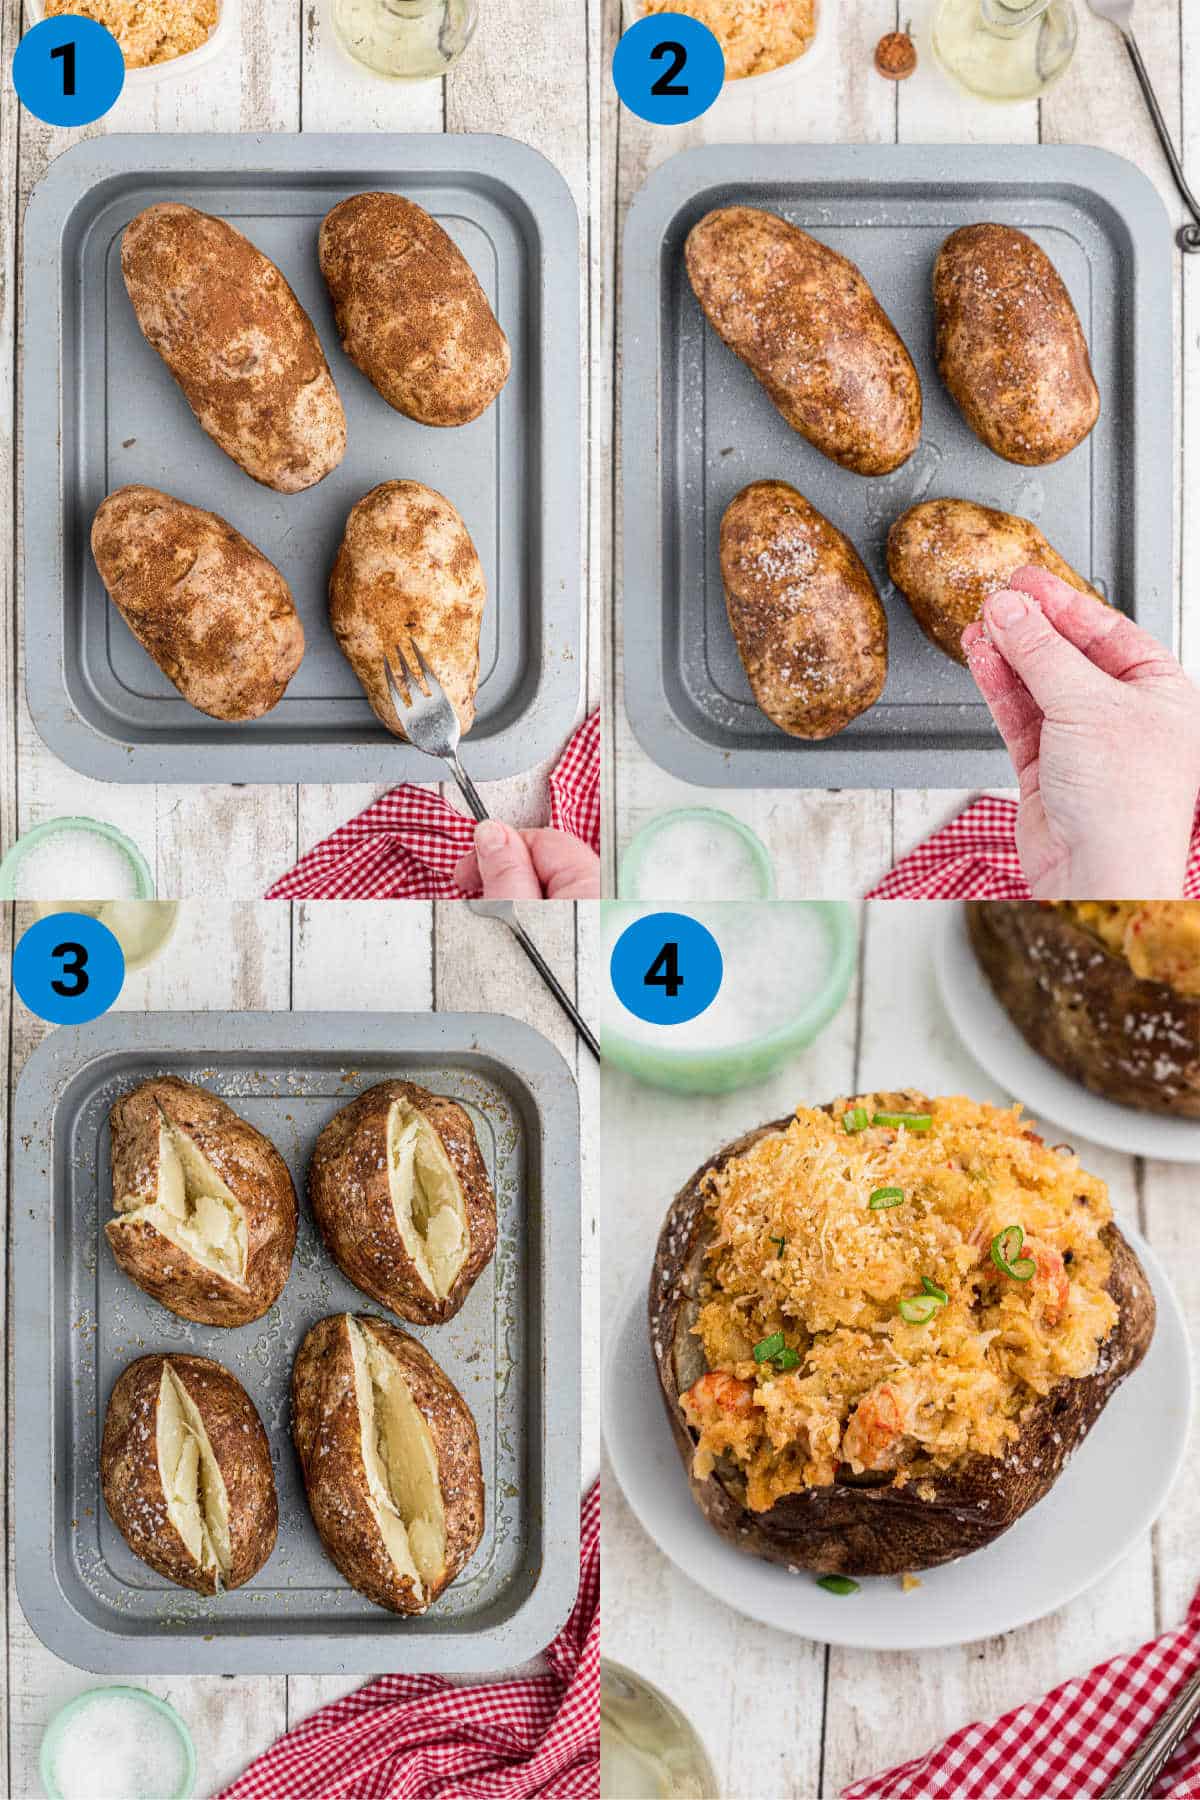 Collage of four images showing recipes steps for how to make a crawfish baked potato.